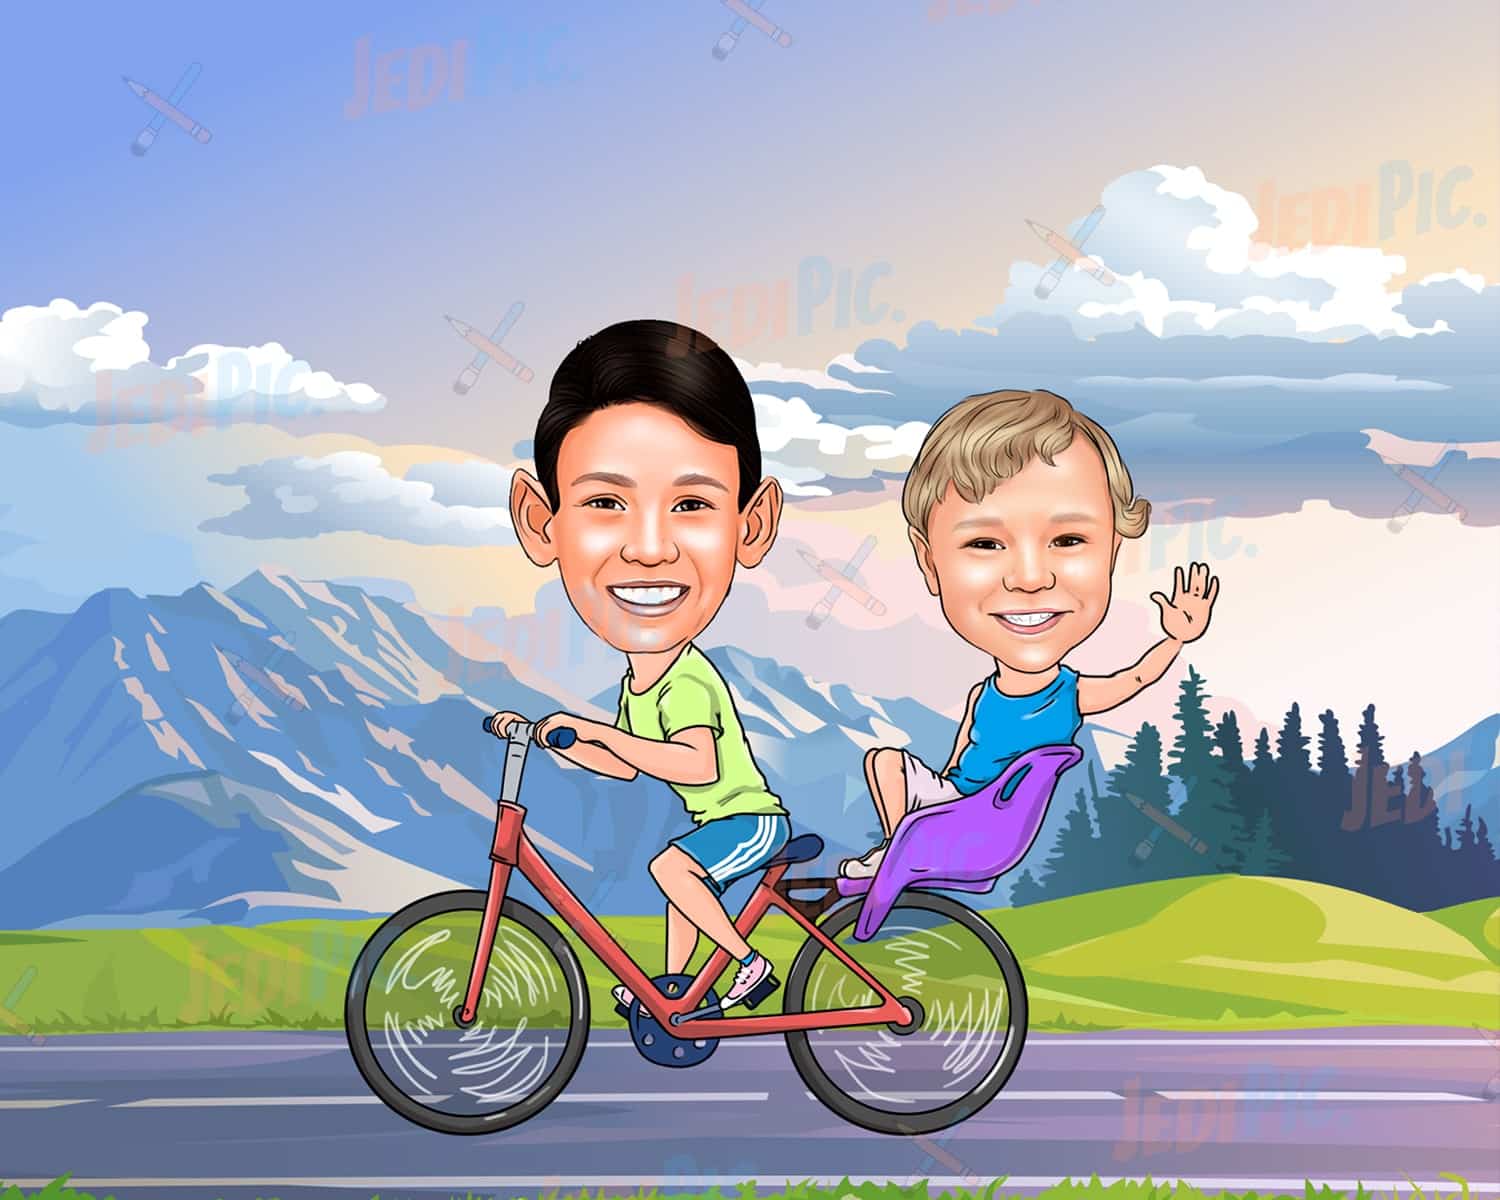 Kids on Bicycle Caricature in Colored Style